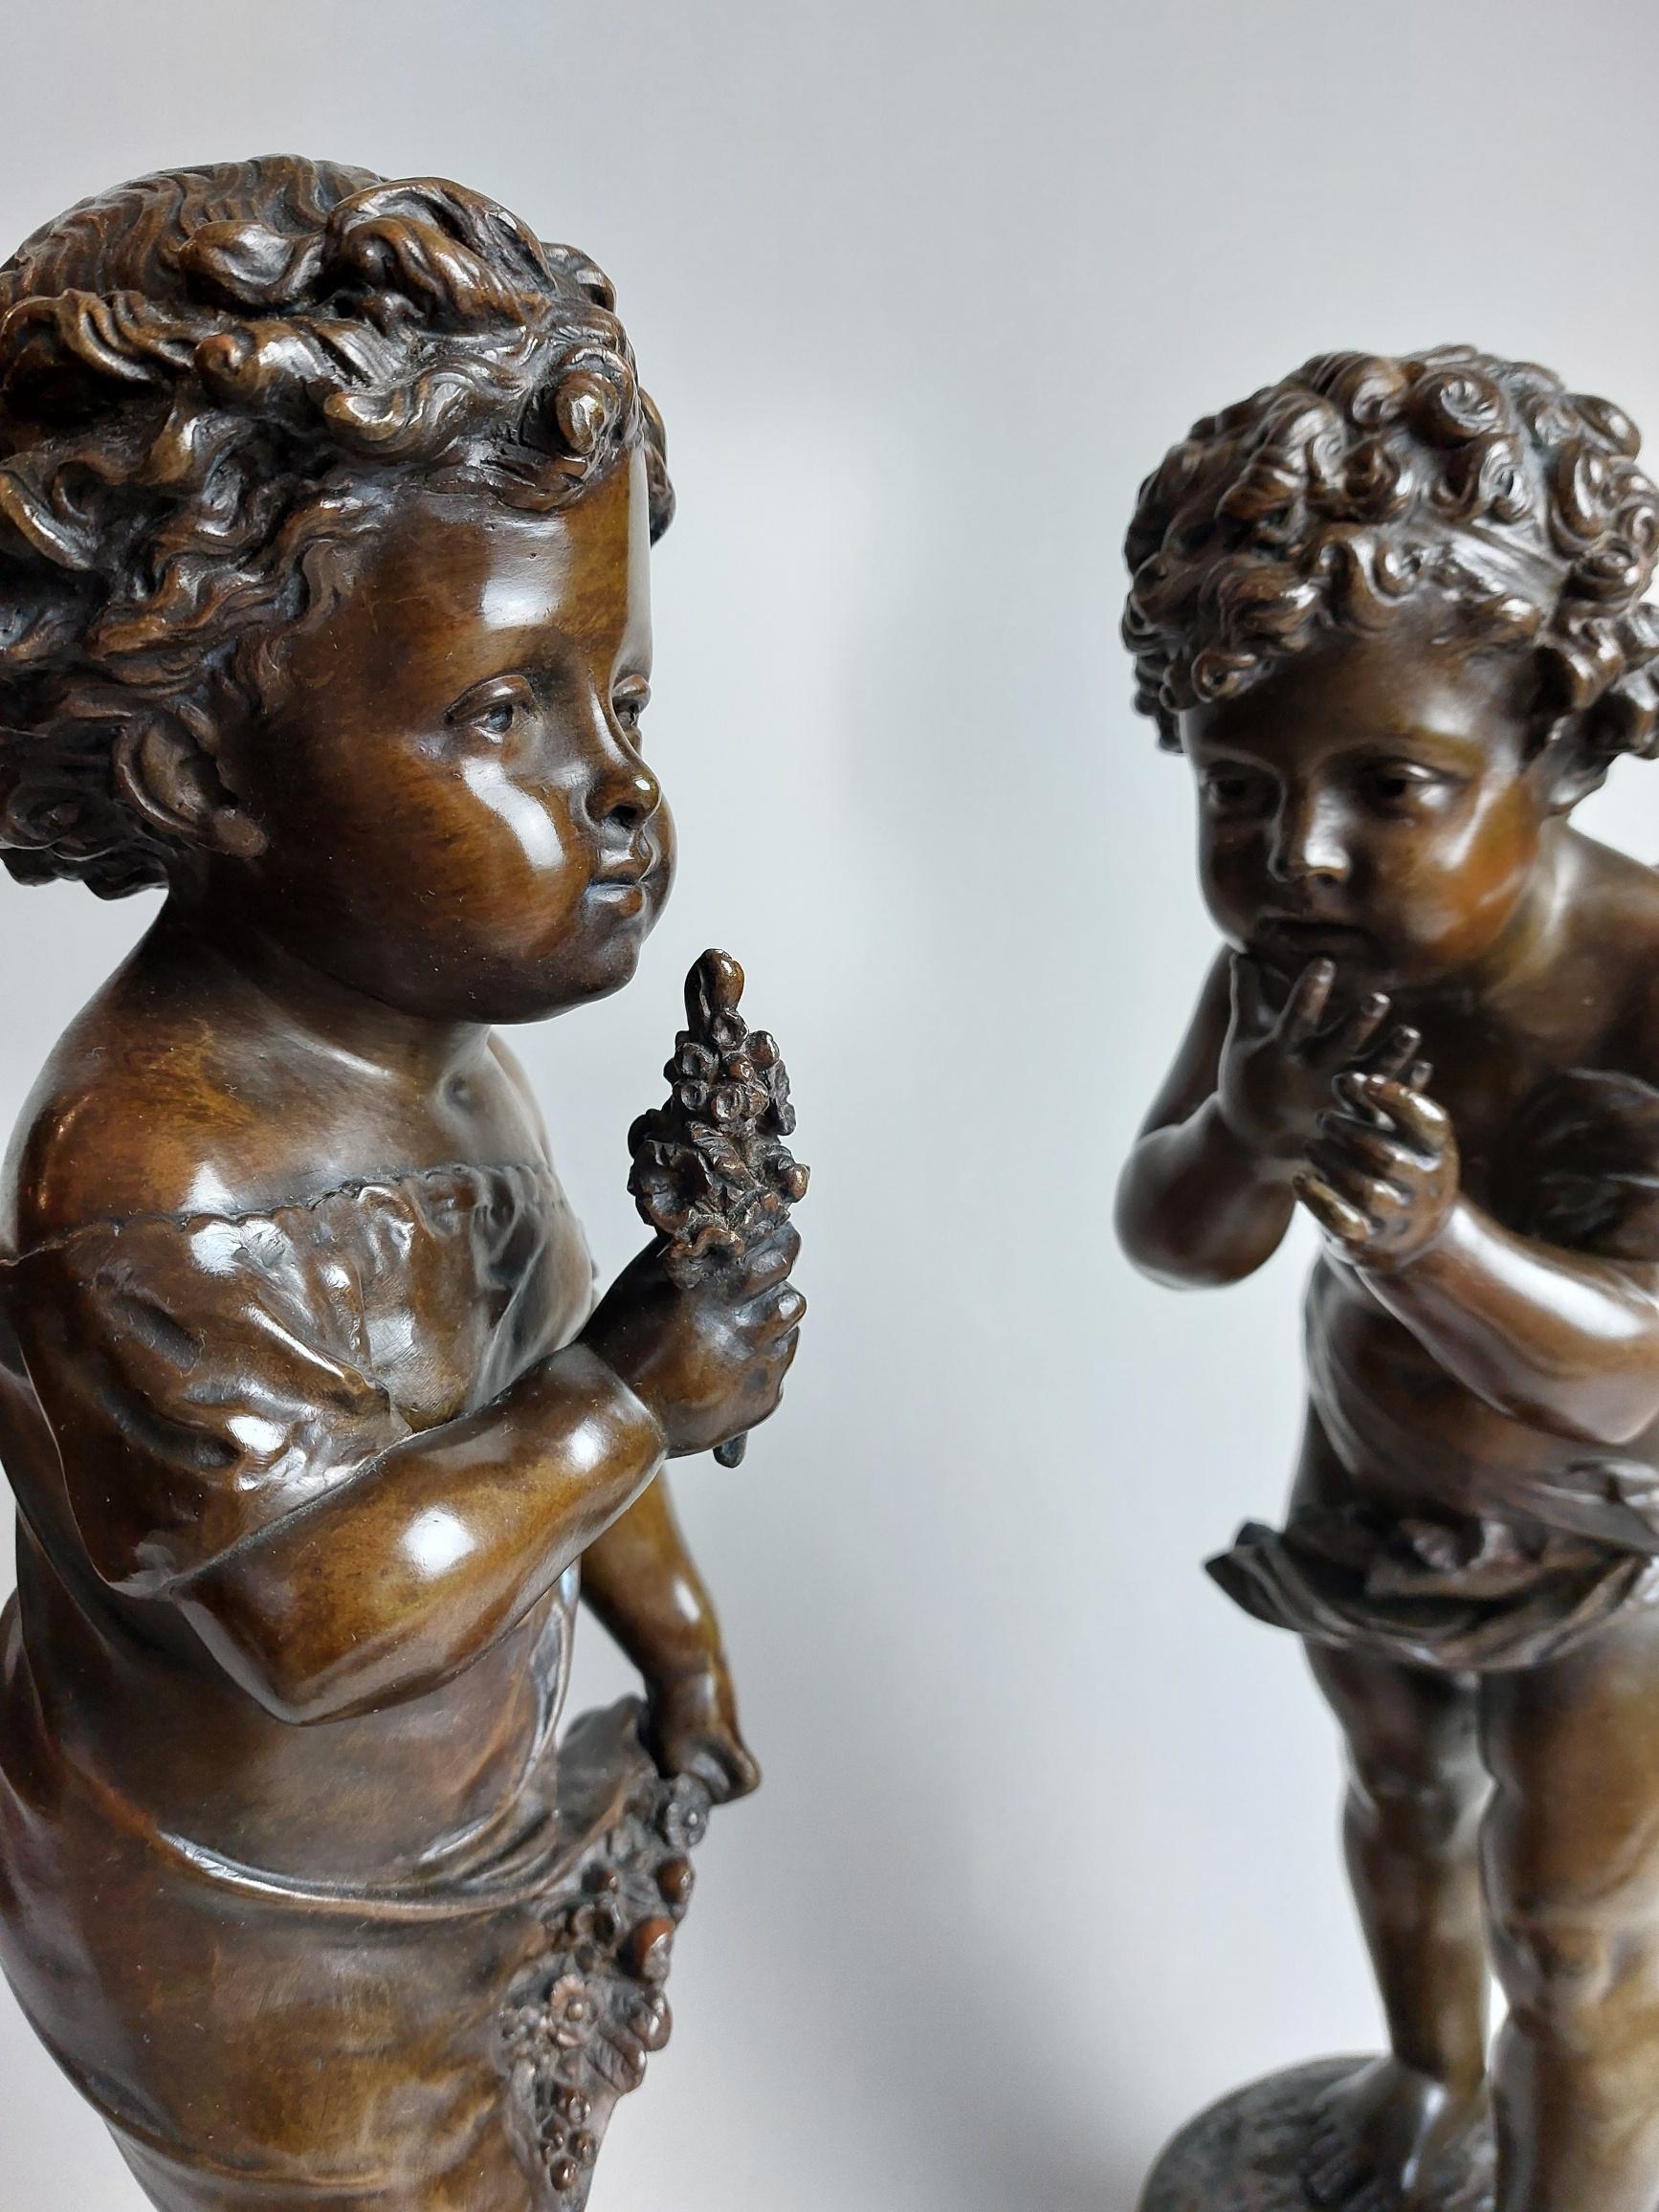 A very sweet pair of 19th century French bronzes depicting a cherub and a young girl. Signed Bulio.

The toddler girl holds a small posy of flowers, the winged Cherub, perhaps cupid? Also resembles a toddler, he leans forward curiously smelling